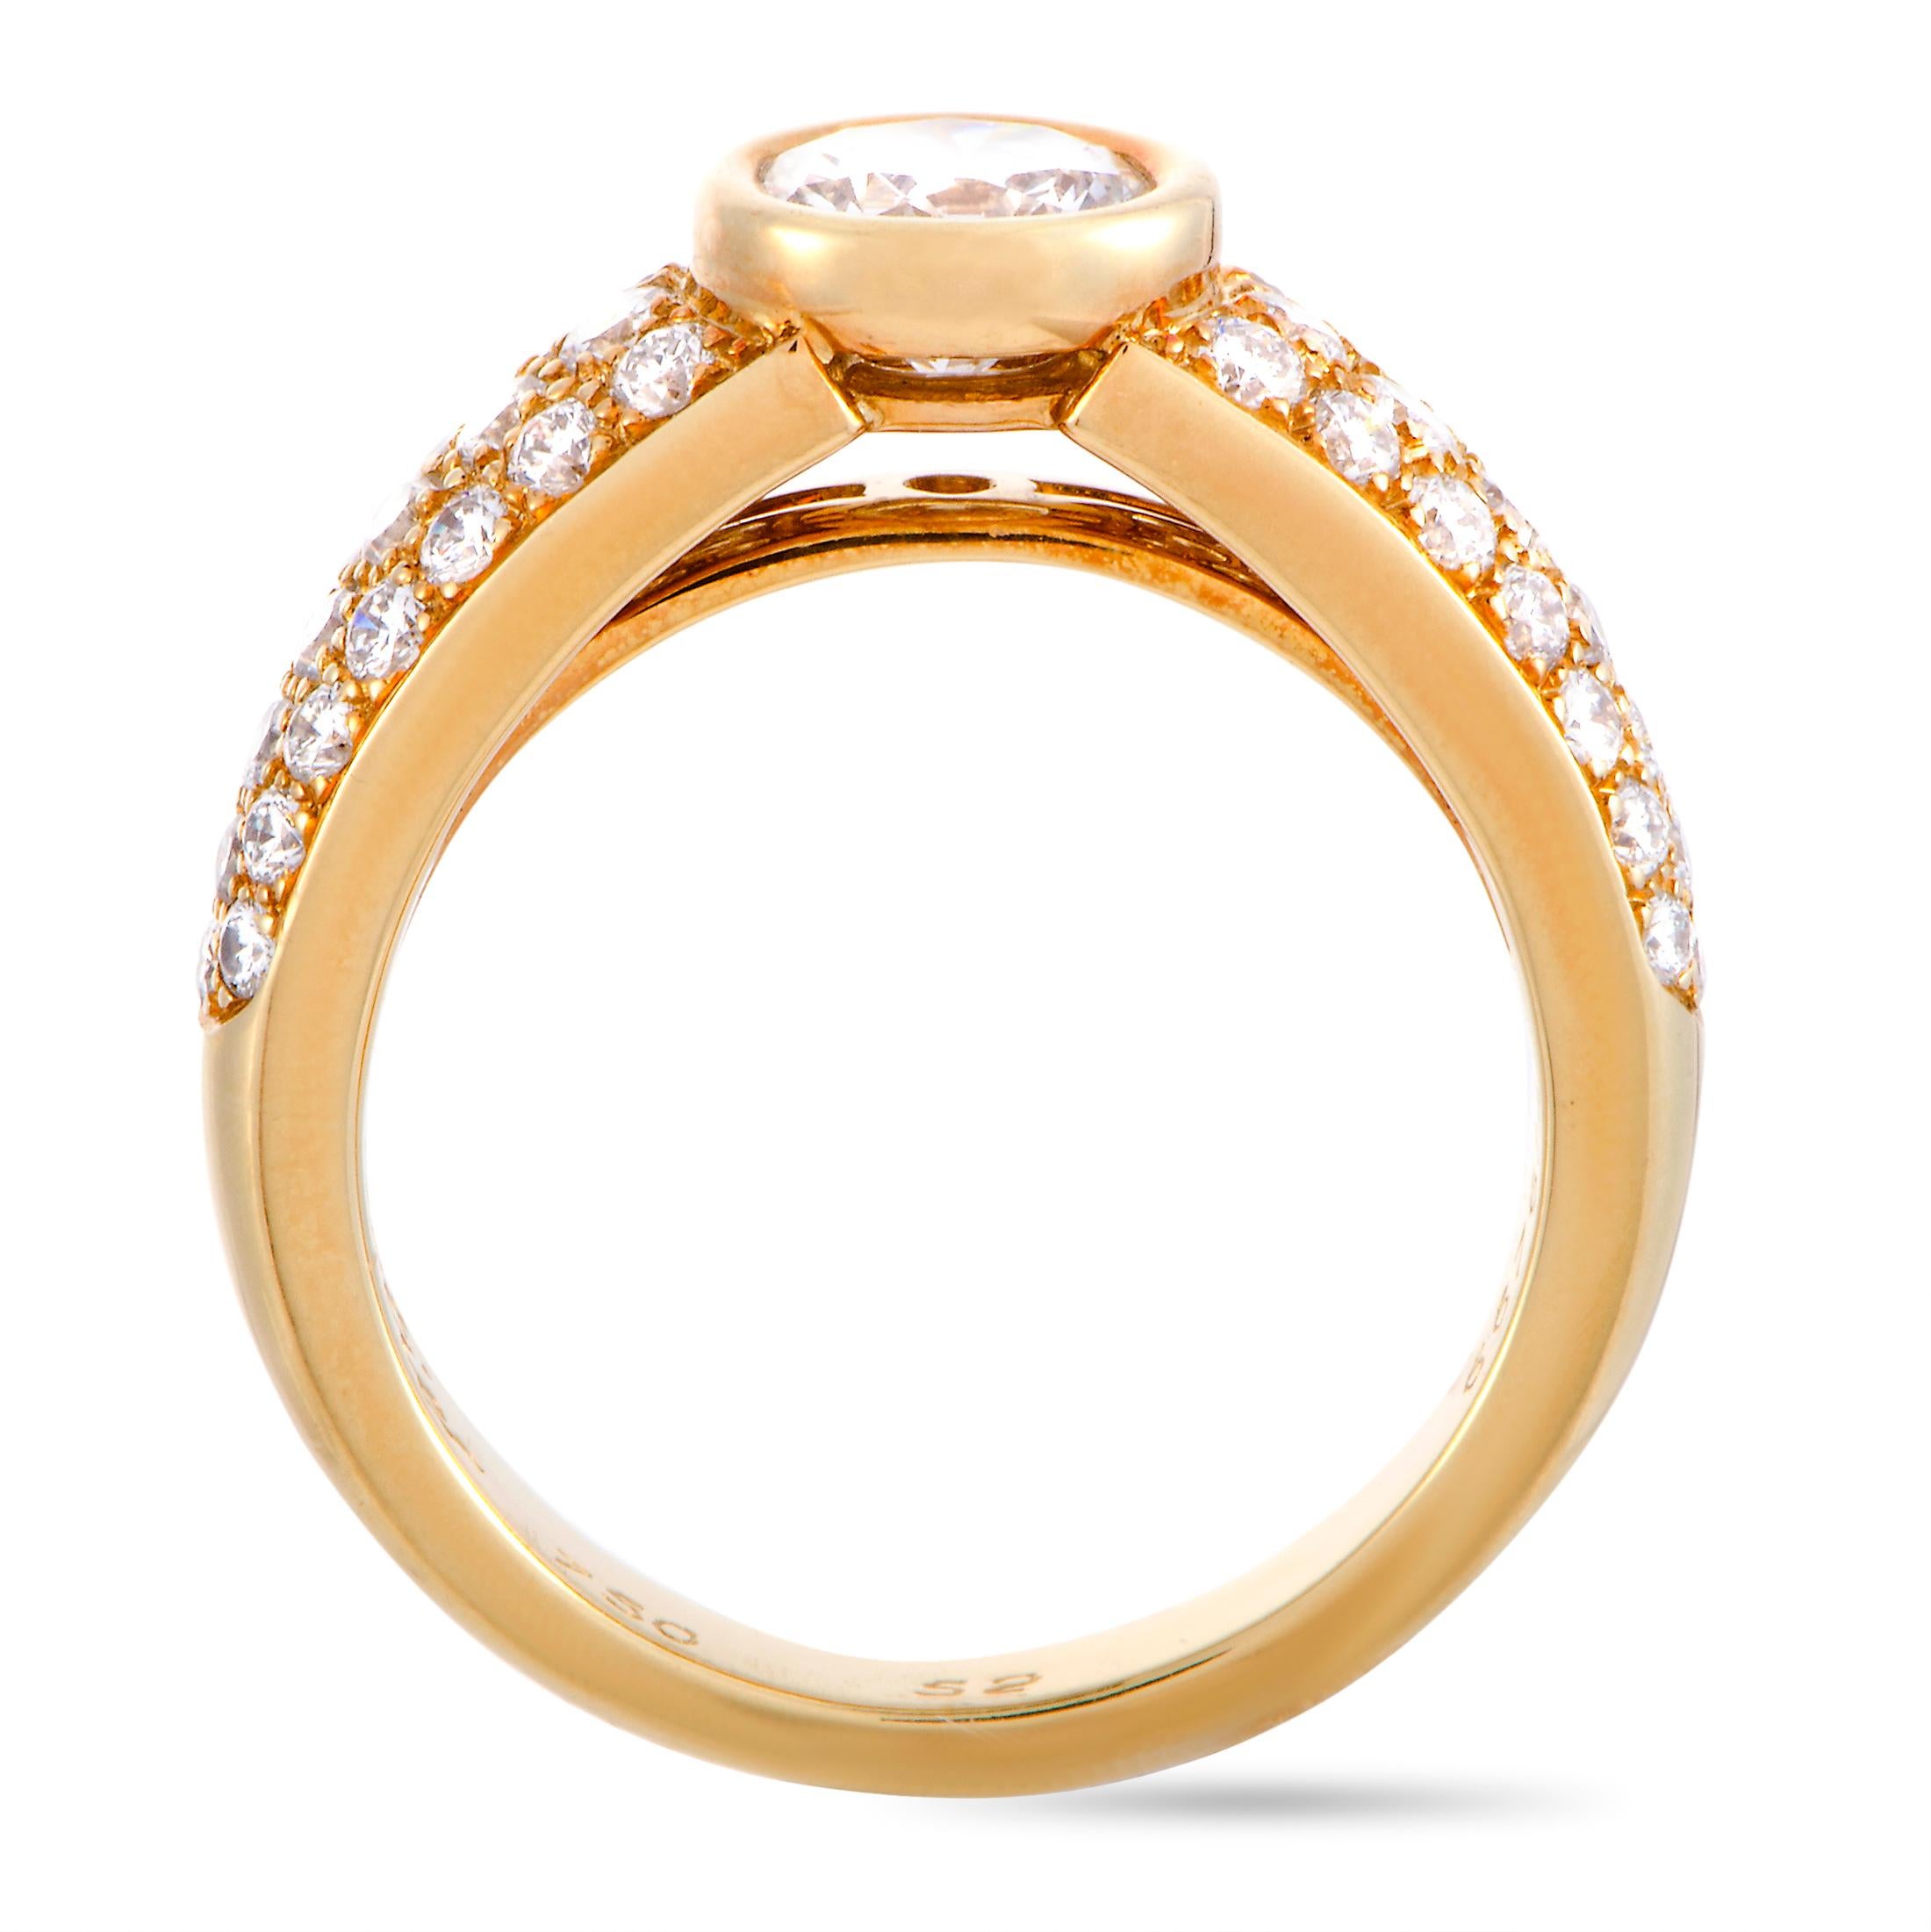 This Cartier engagement ring is made out of 18K yellow gold and diamonds and weighs 6.8 grams. The center diamond stone boasts grade G color and VS1 clarity and weighs approximately 0.75 carats, and the side diamonds amount to 0.50 carats. The ring